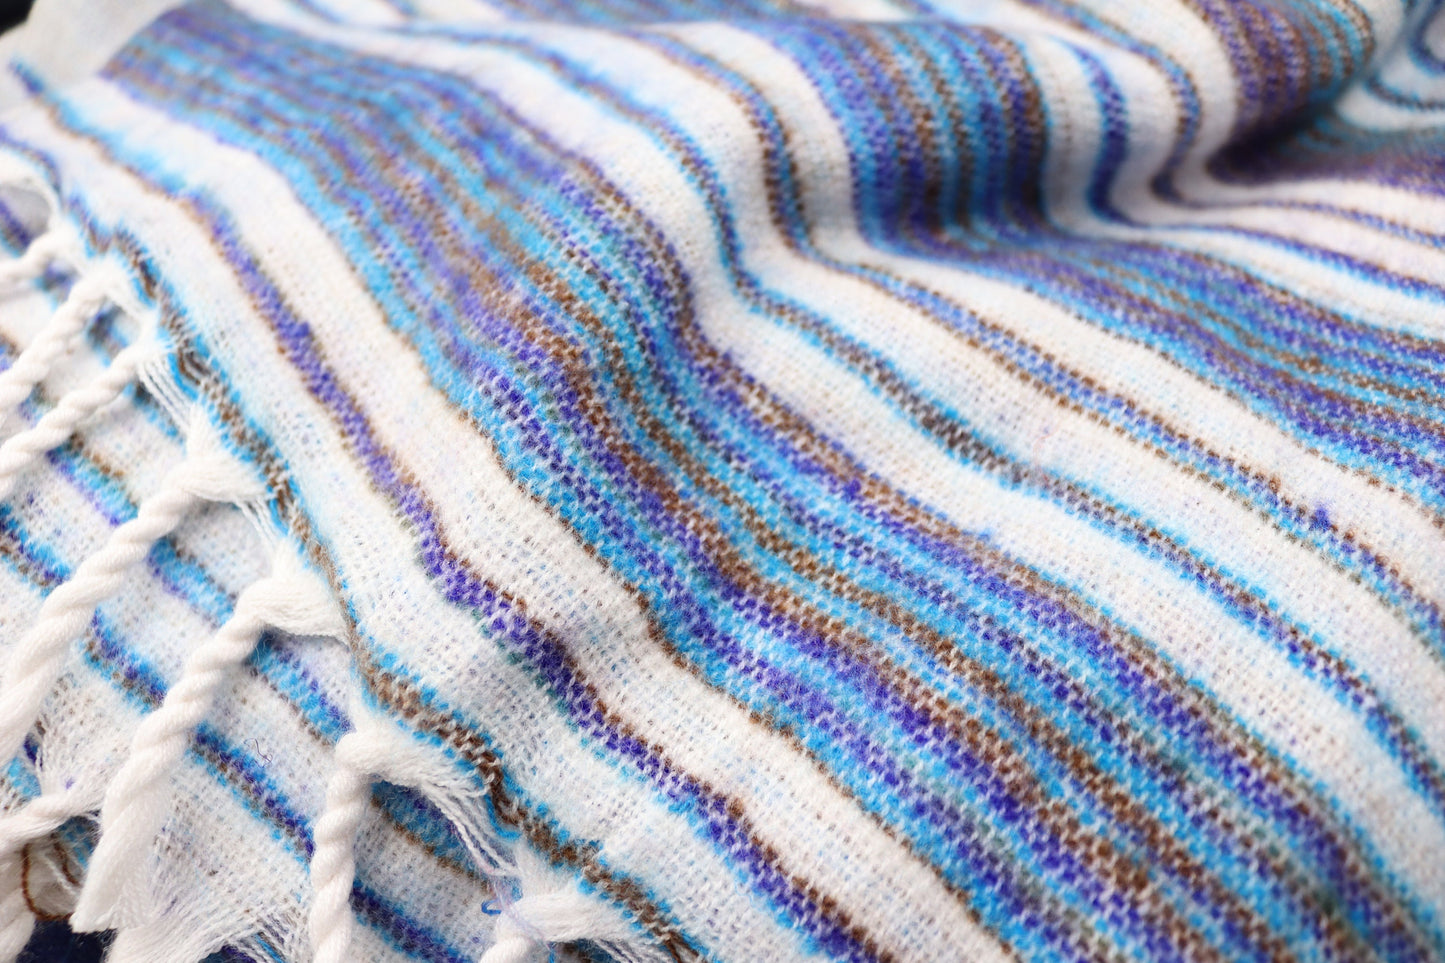 Blanket Scarf / Shawl / Throw - White and Blue Striped - Bare Canvas